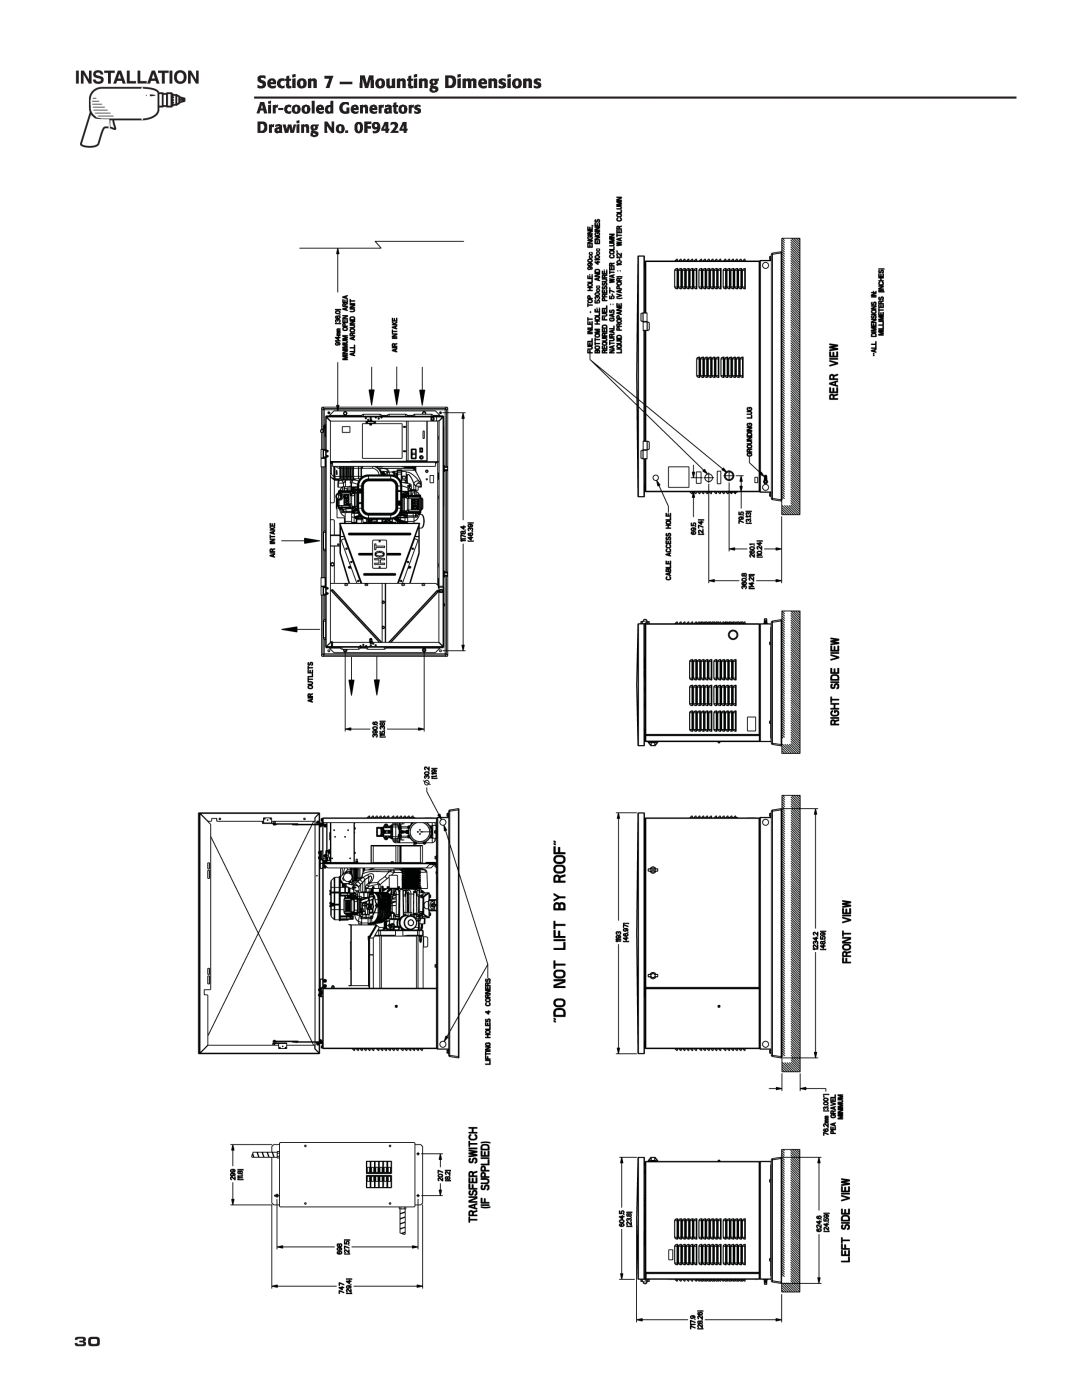 Generac Power Systems 5251, 5252, 5254, 5255, 5253 owner manual Mounting Dimensions, Air-cooled Generators Drawing No. 0F9424 